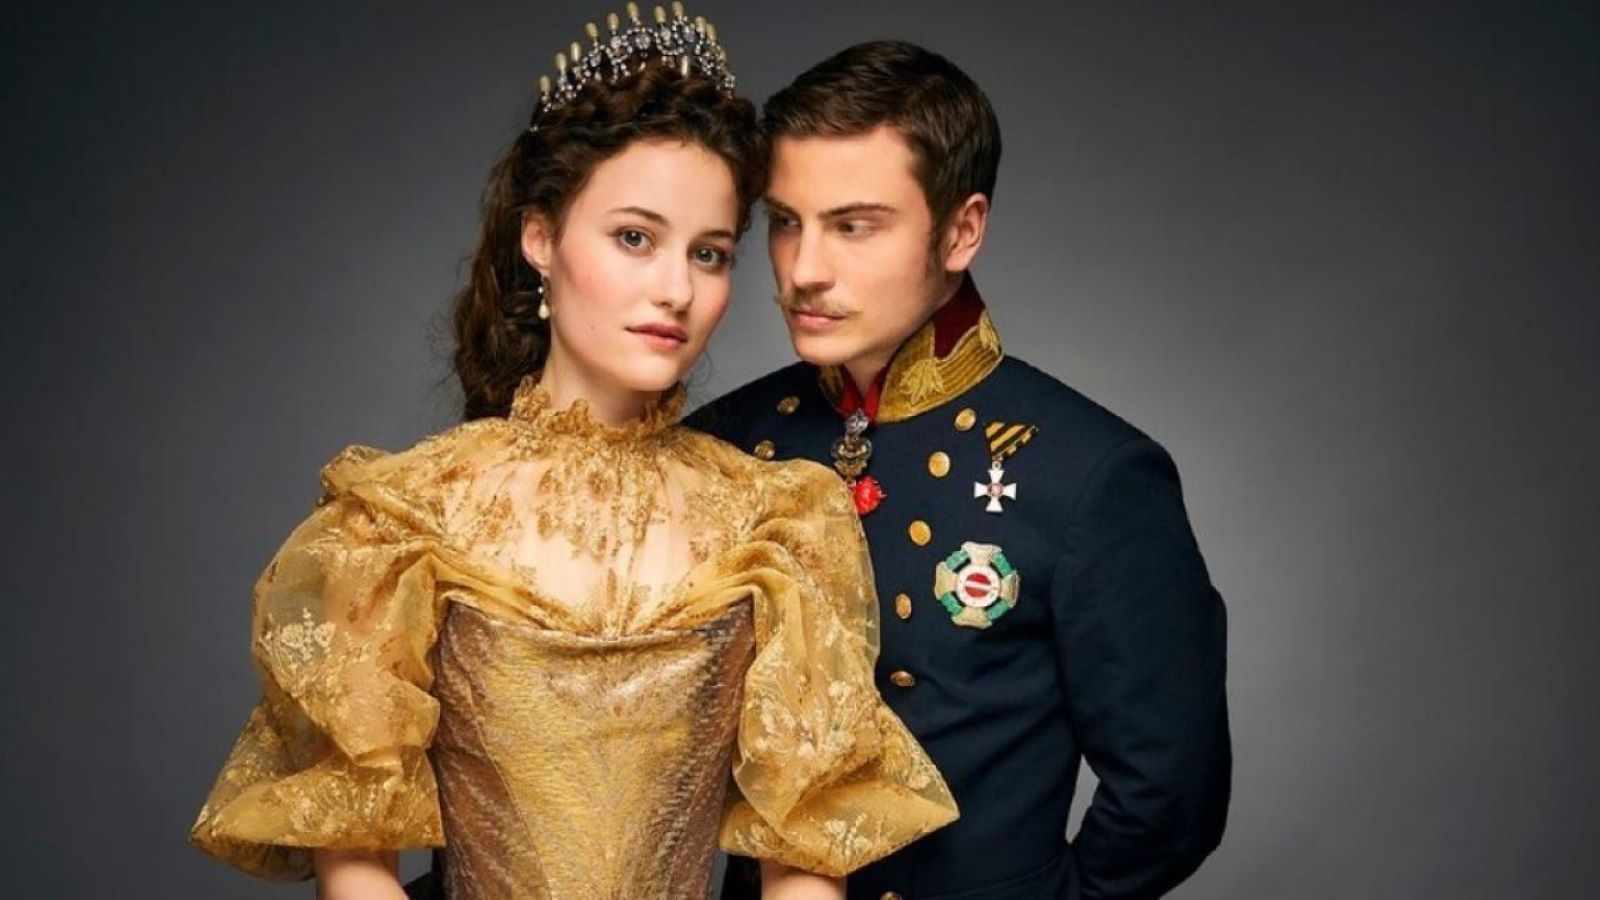 Sissi returns to Canale 5: plot and cast of tonight's episodes of the event series on Elizabeth of Bavaria